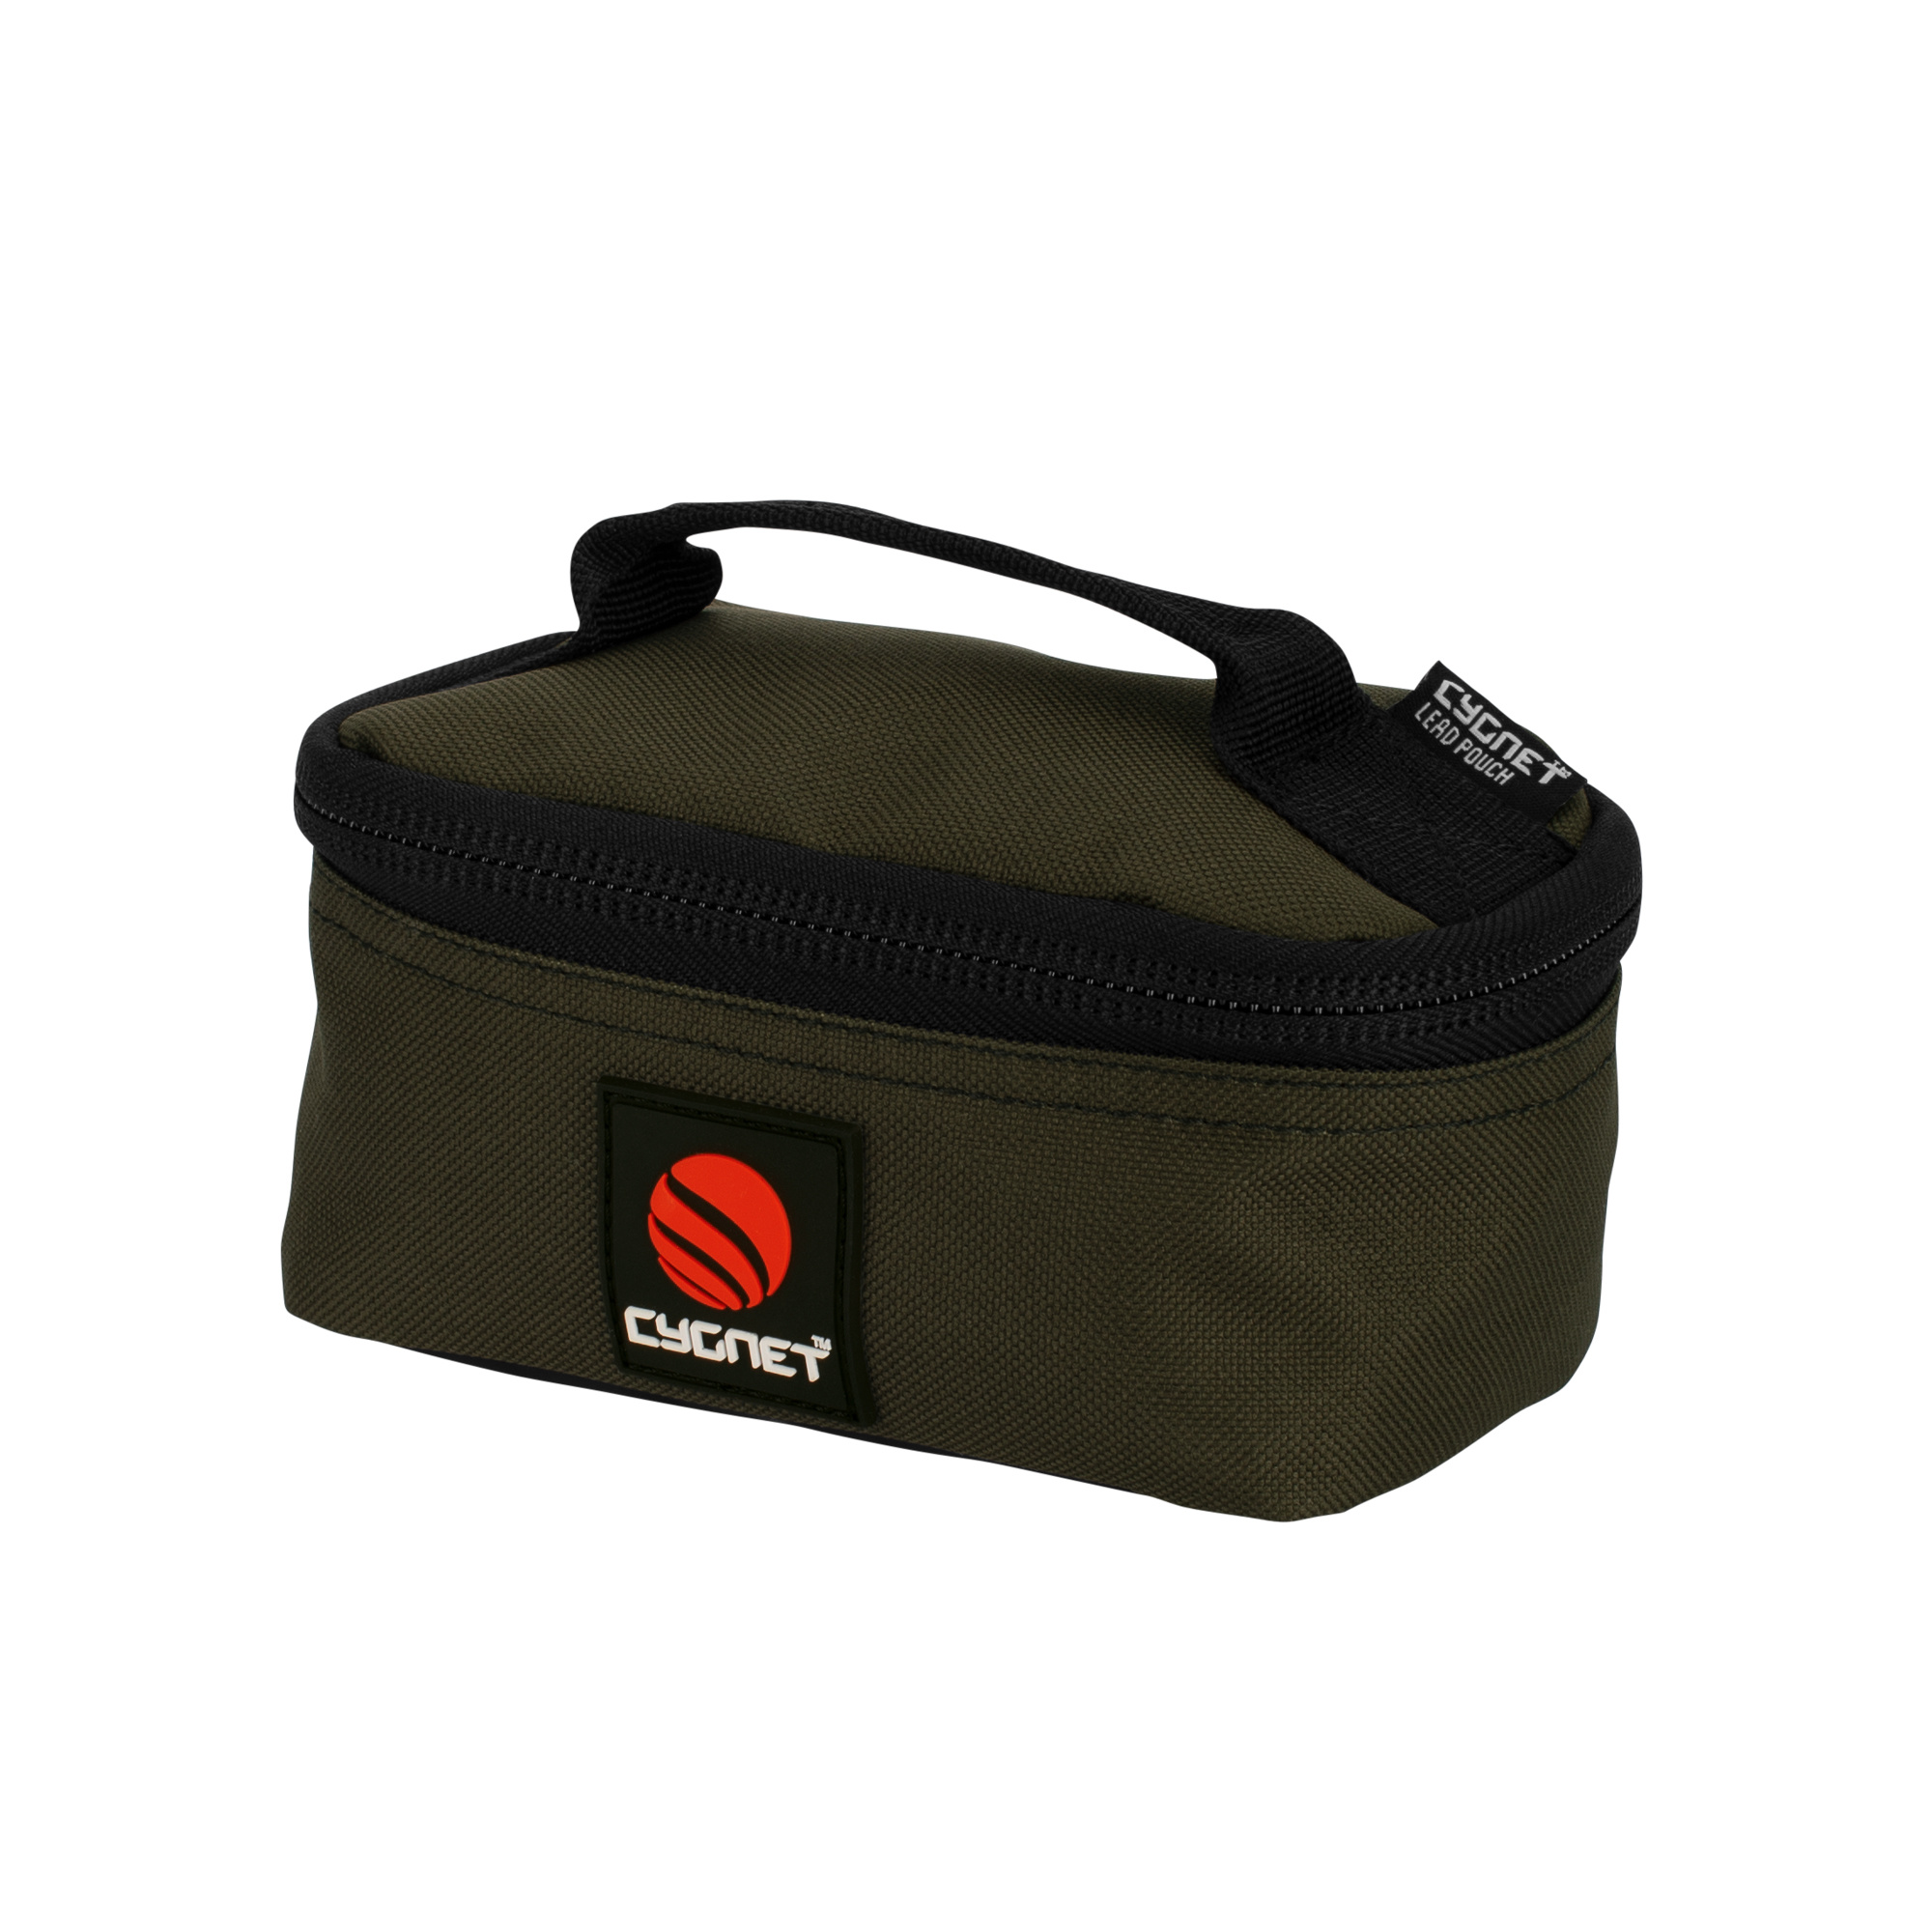 Cygnet Tackle Cygnet Tackle Lead Pouch